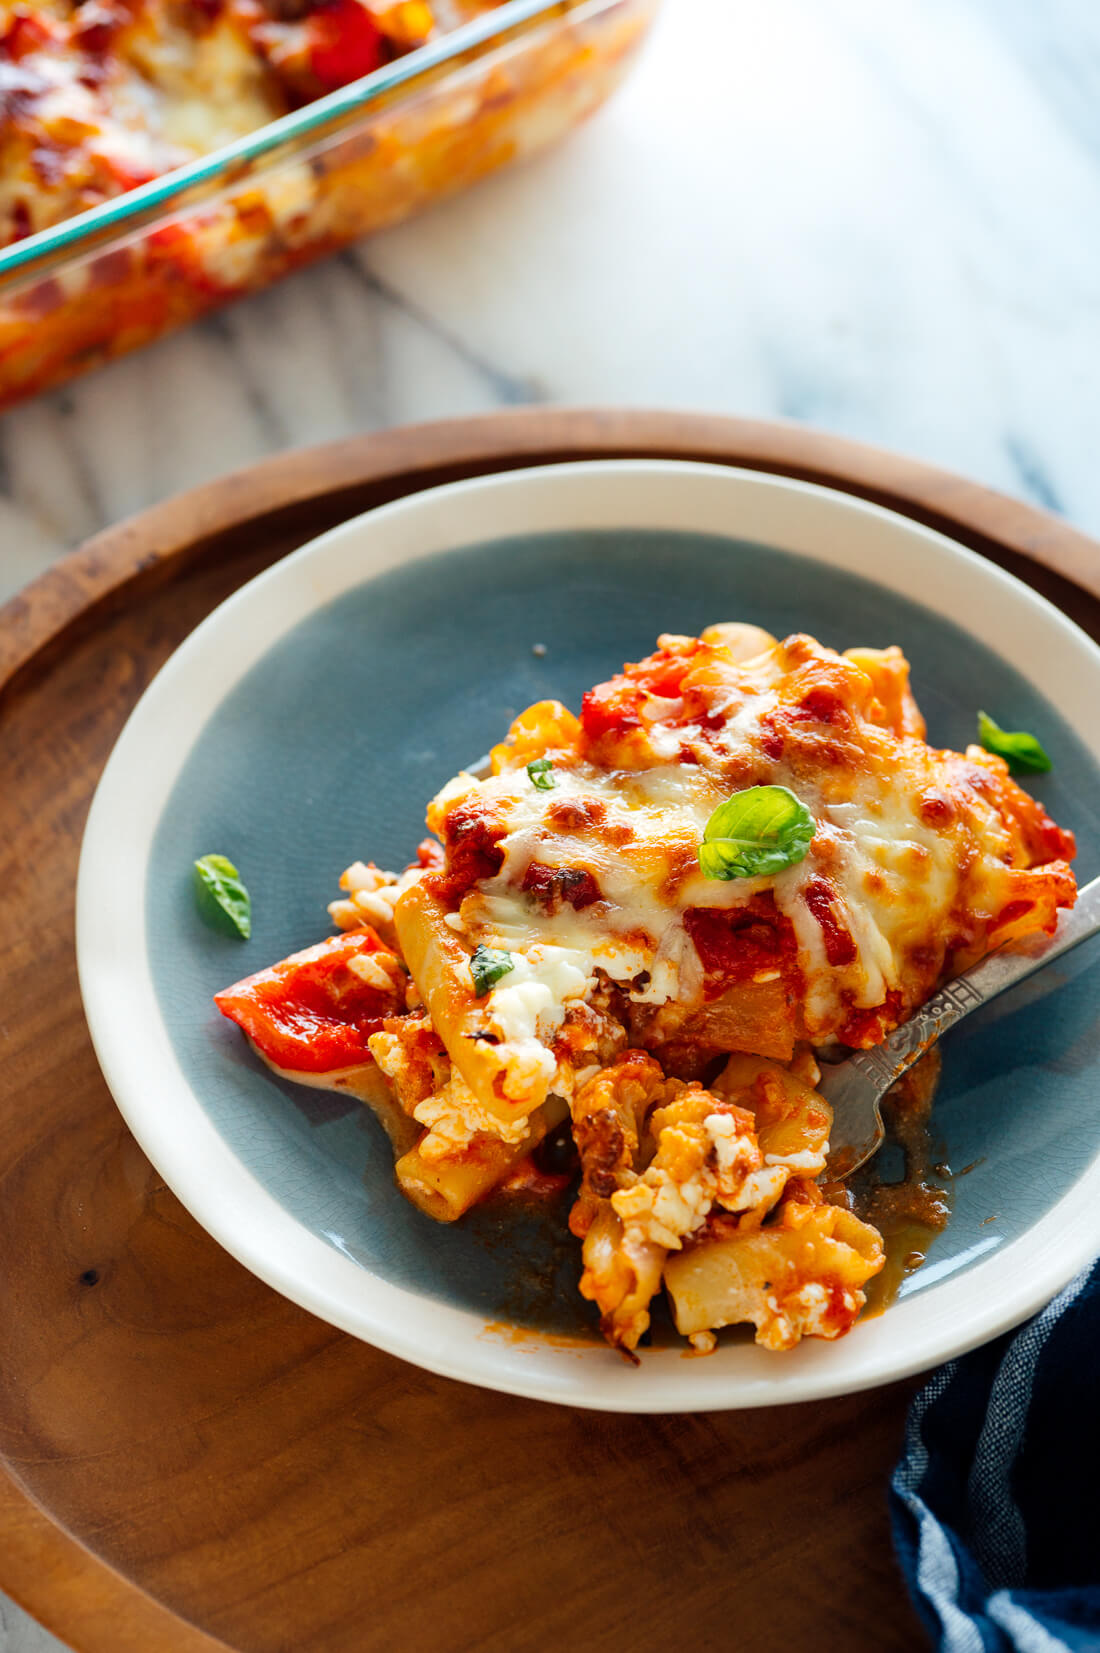 Baked Ziti with Roasted Vegetables - Body By Vee